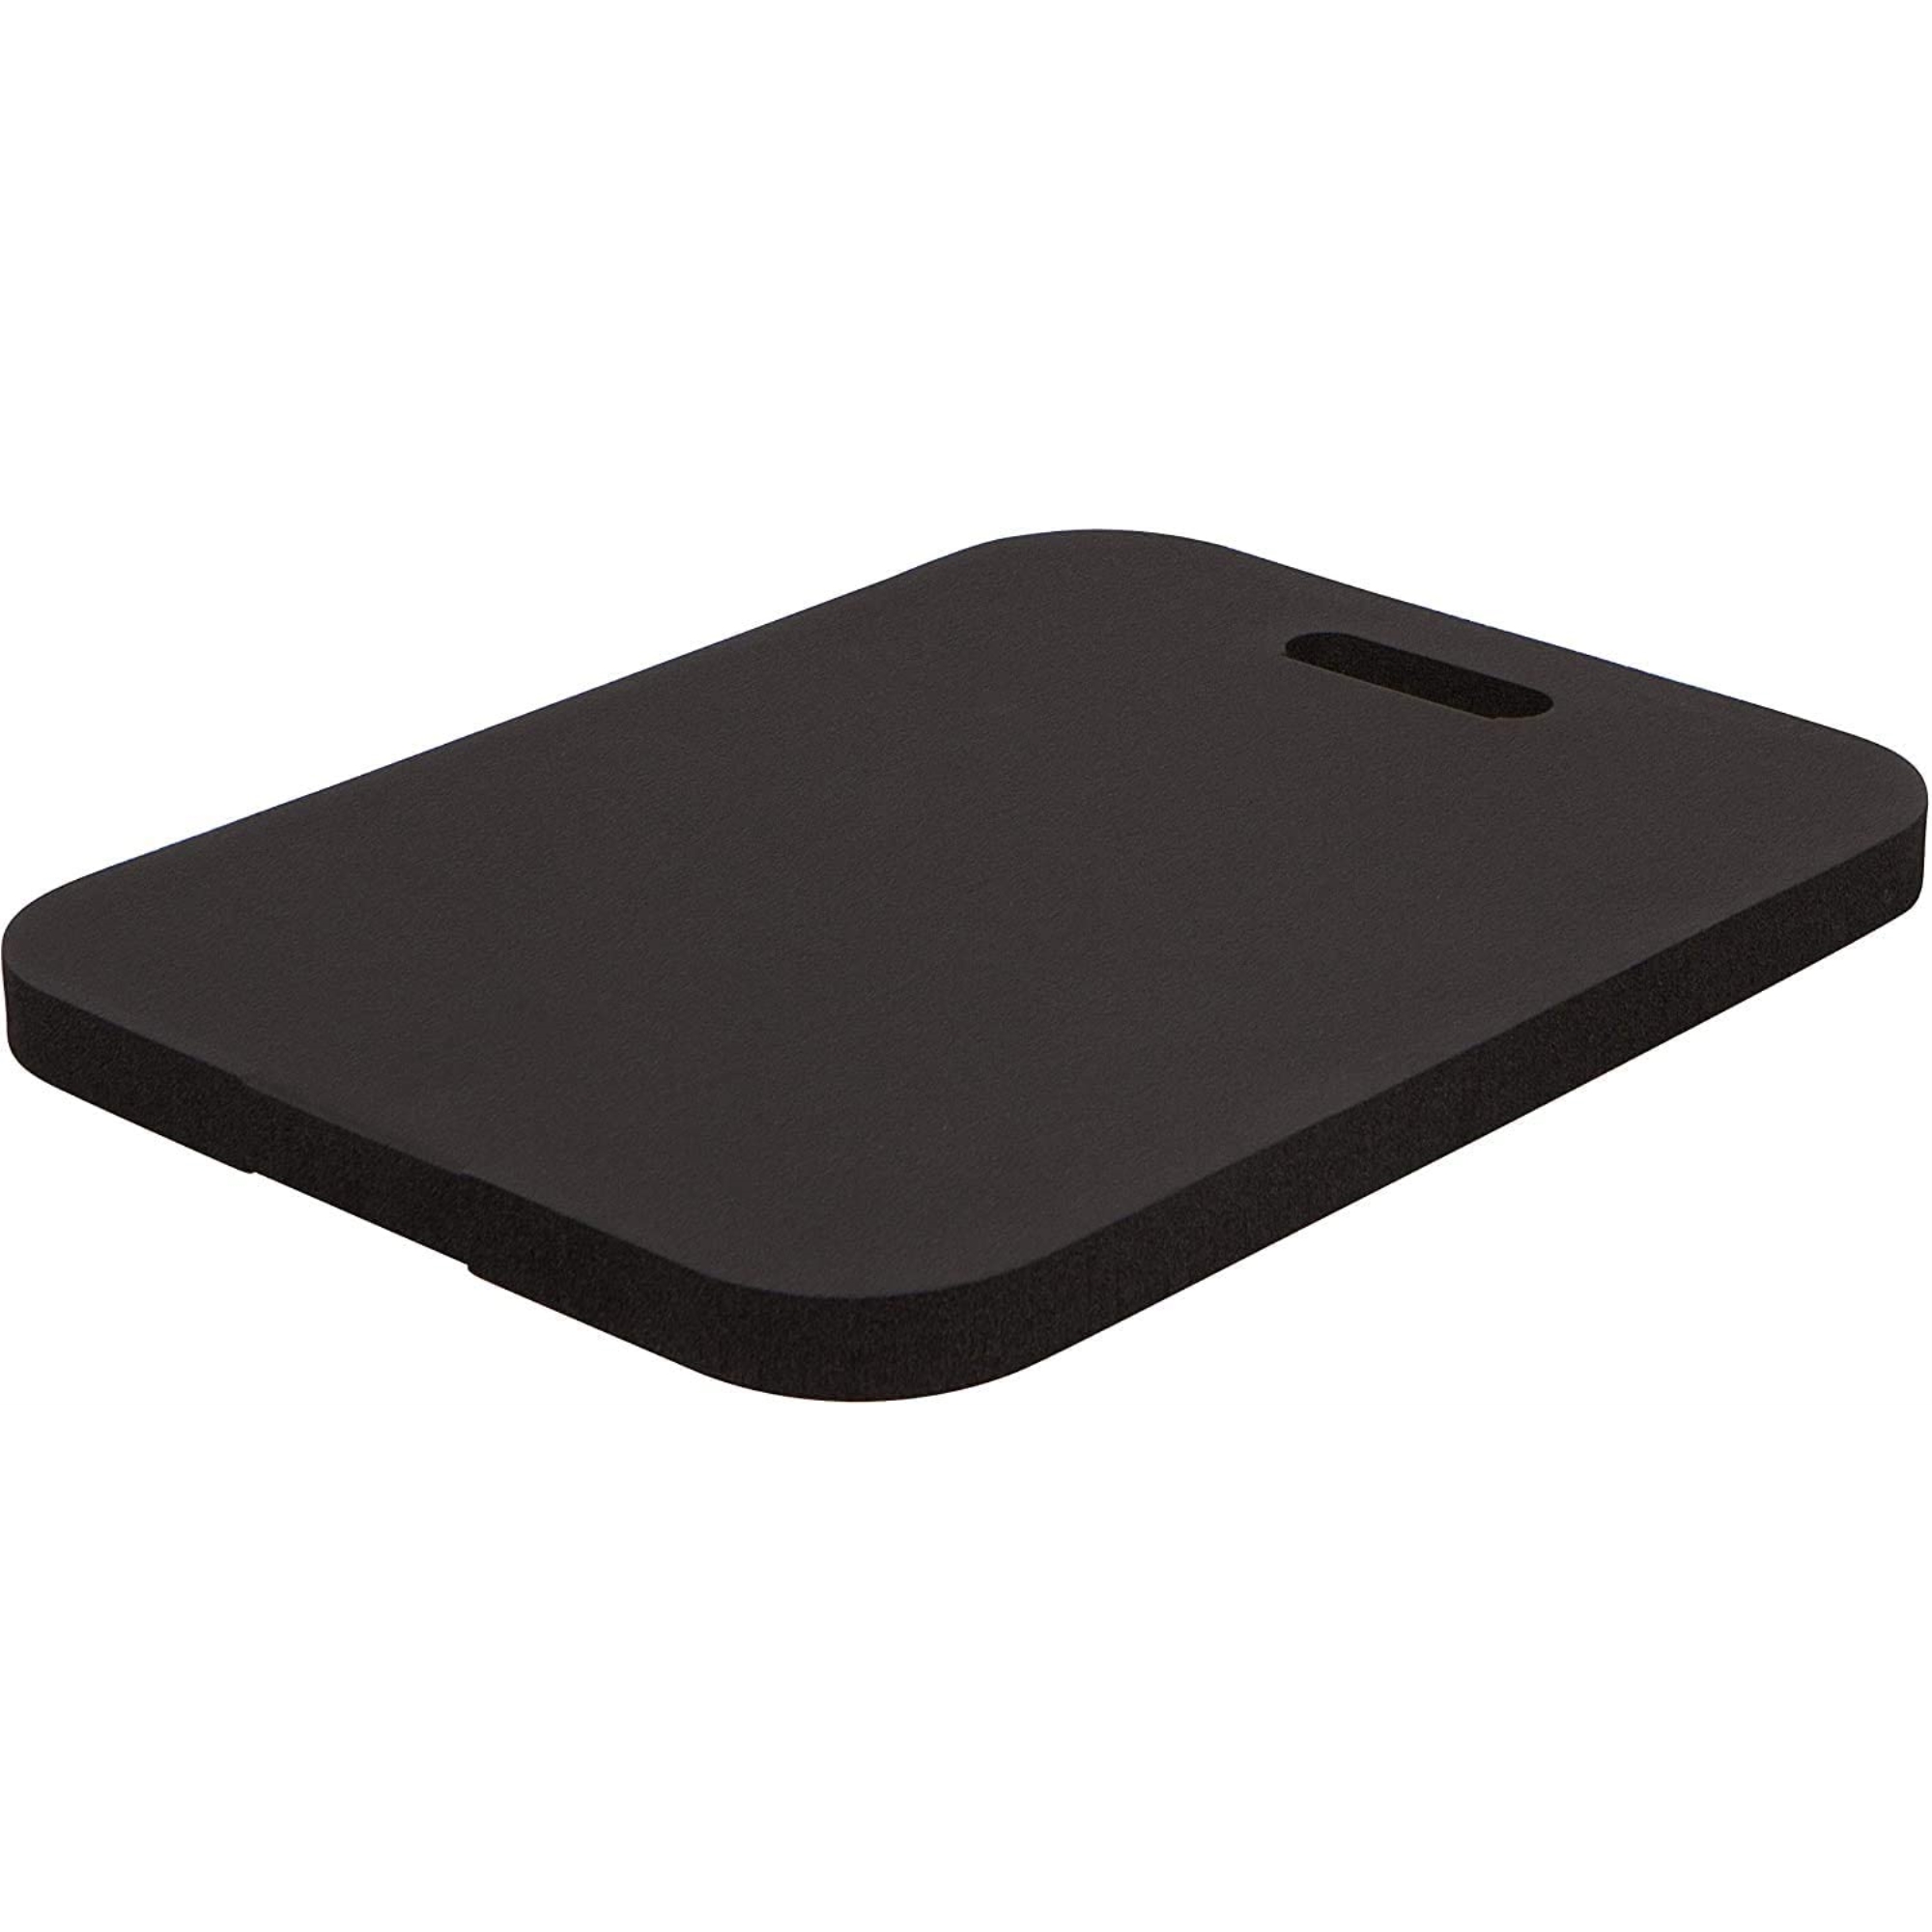 EarthEdge The Pad, The Ultimate Comfort Kneeling Pad, Black - 15in x 20in - image 1 of 6